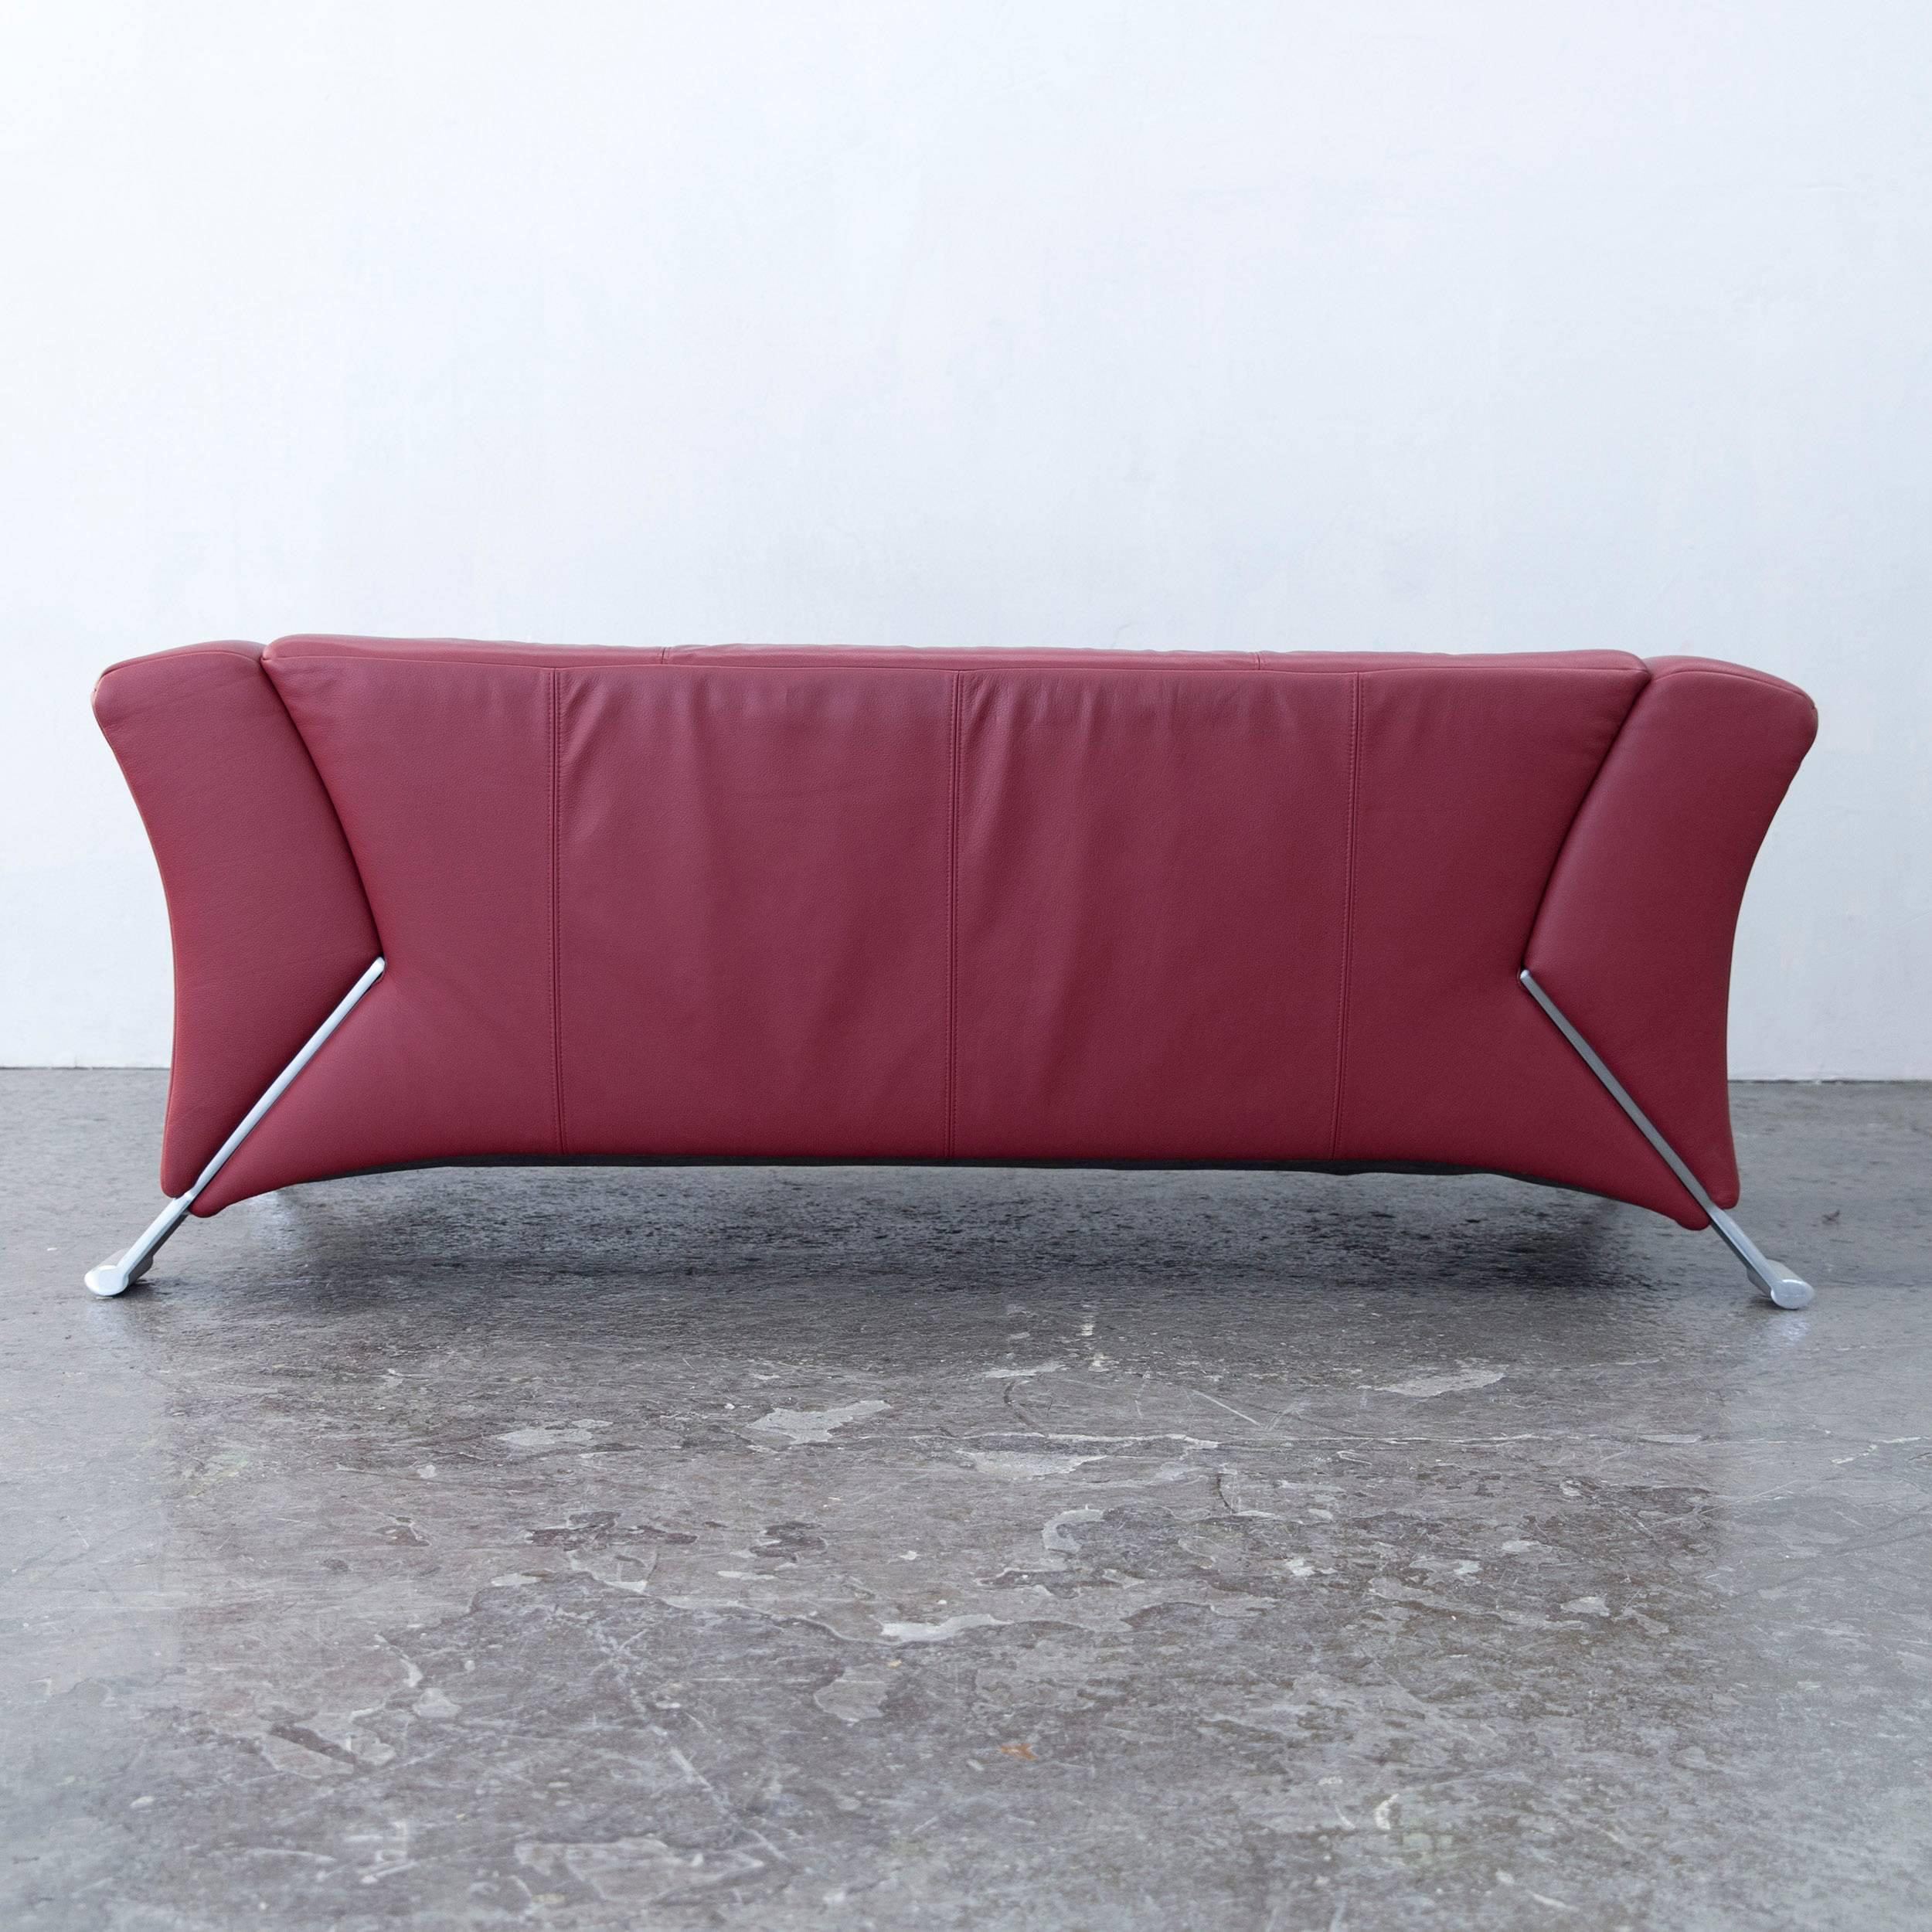 Rolf Benz 322 Designer Sofa Leather Red Two-Seat Modern In Excellent Condition For Sale In Cologne, DE